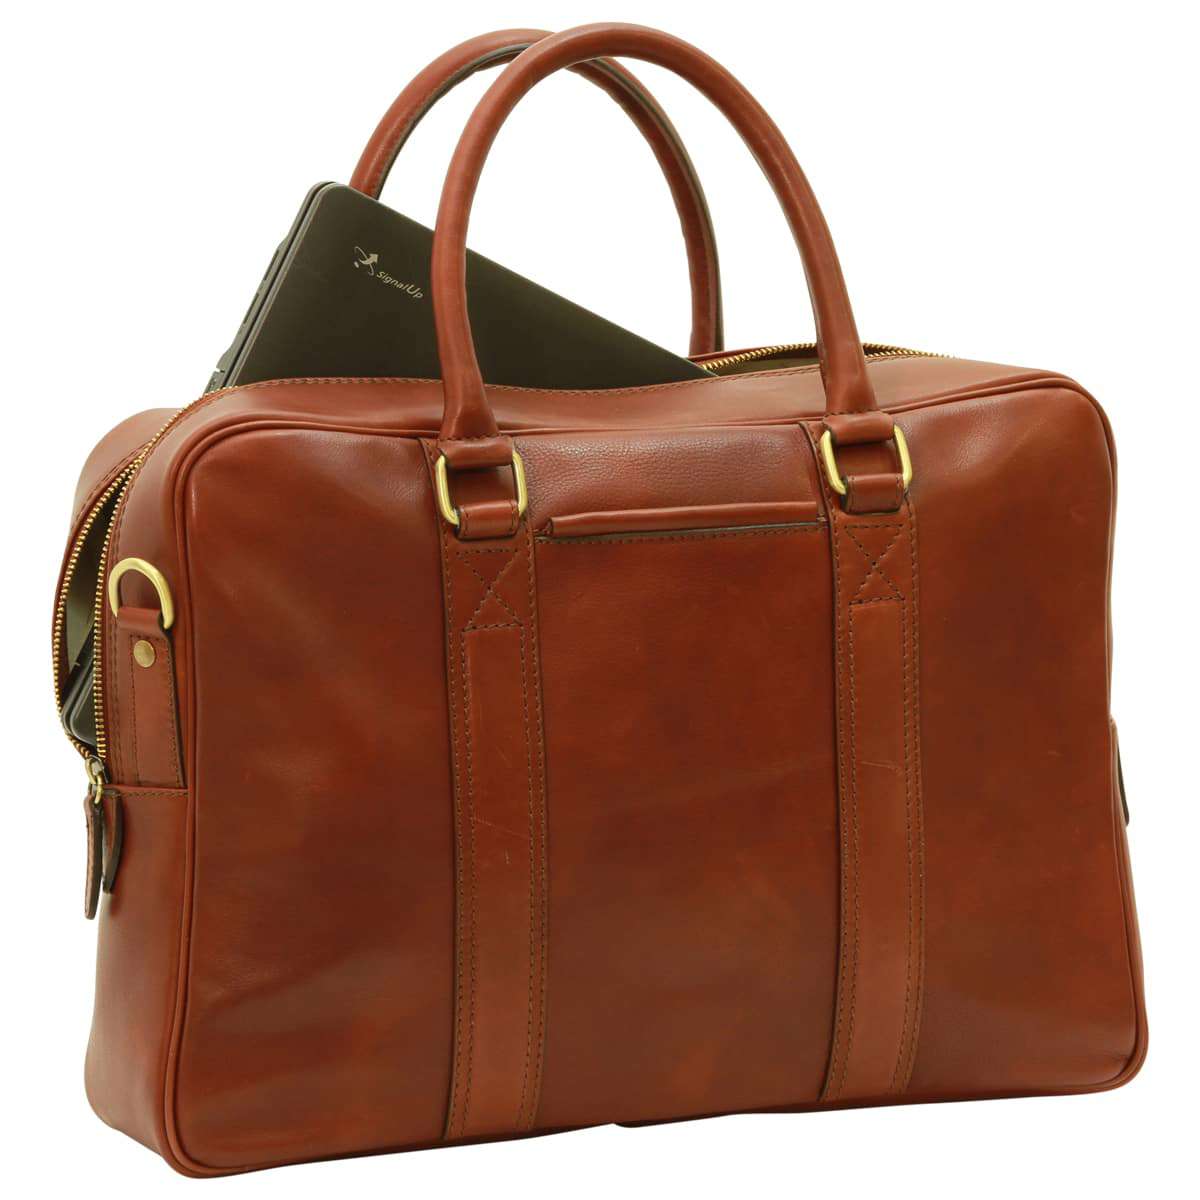 Soft Calfskin Leather Briefcase - Brown | 030191MA UK | Old Angler Firenze